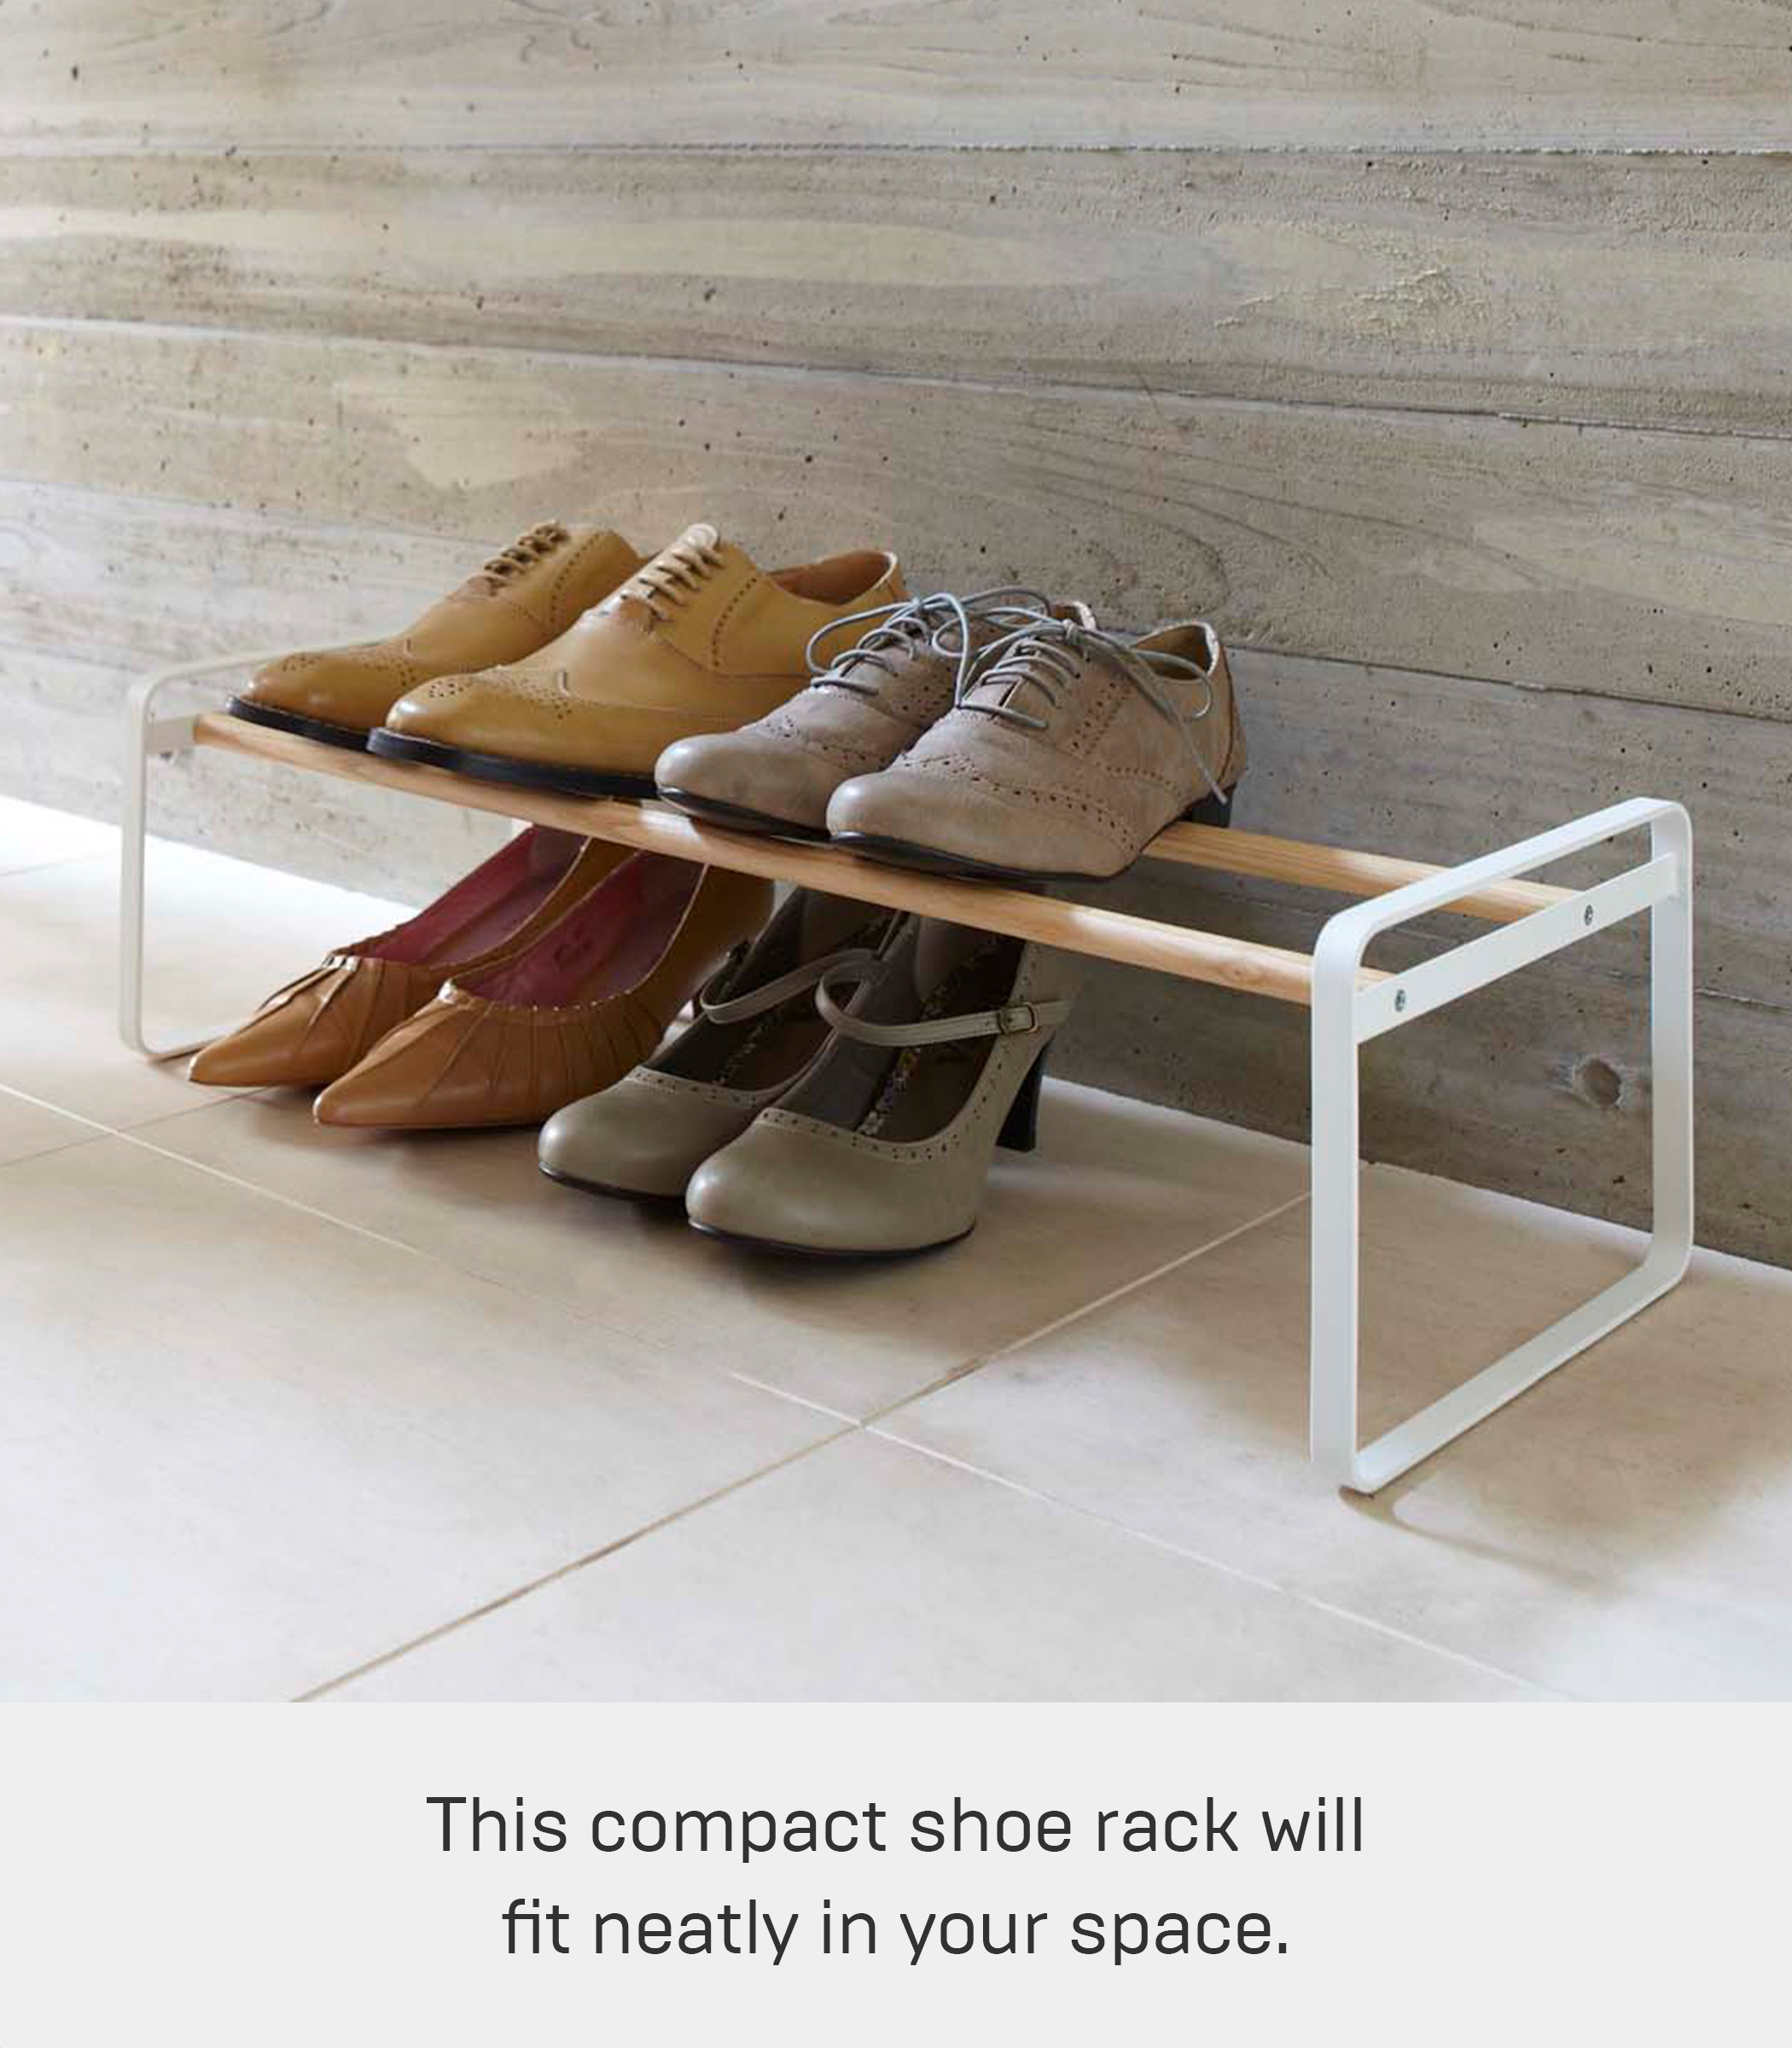 Yamazaki Home Stackable Shoe Rack, White, Steel,  Holds up to 4 pairs of shoes per shelf, Supports 6.6 pounds, Stackable - image 2 of 5